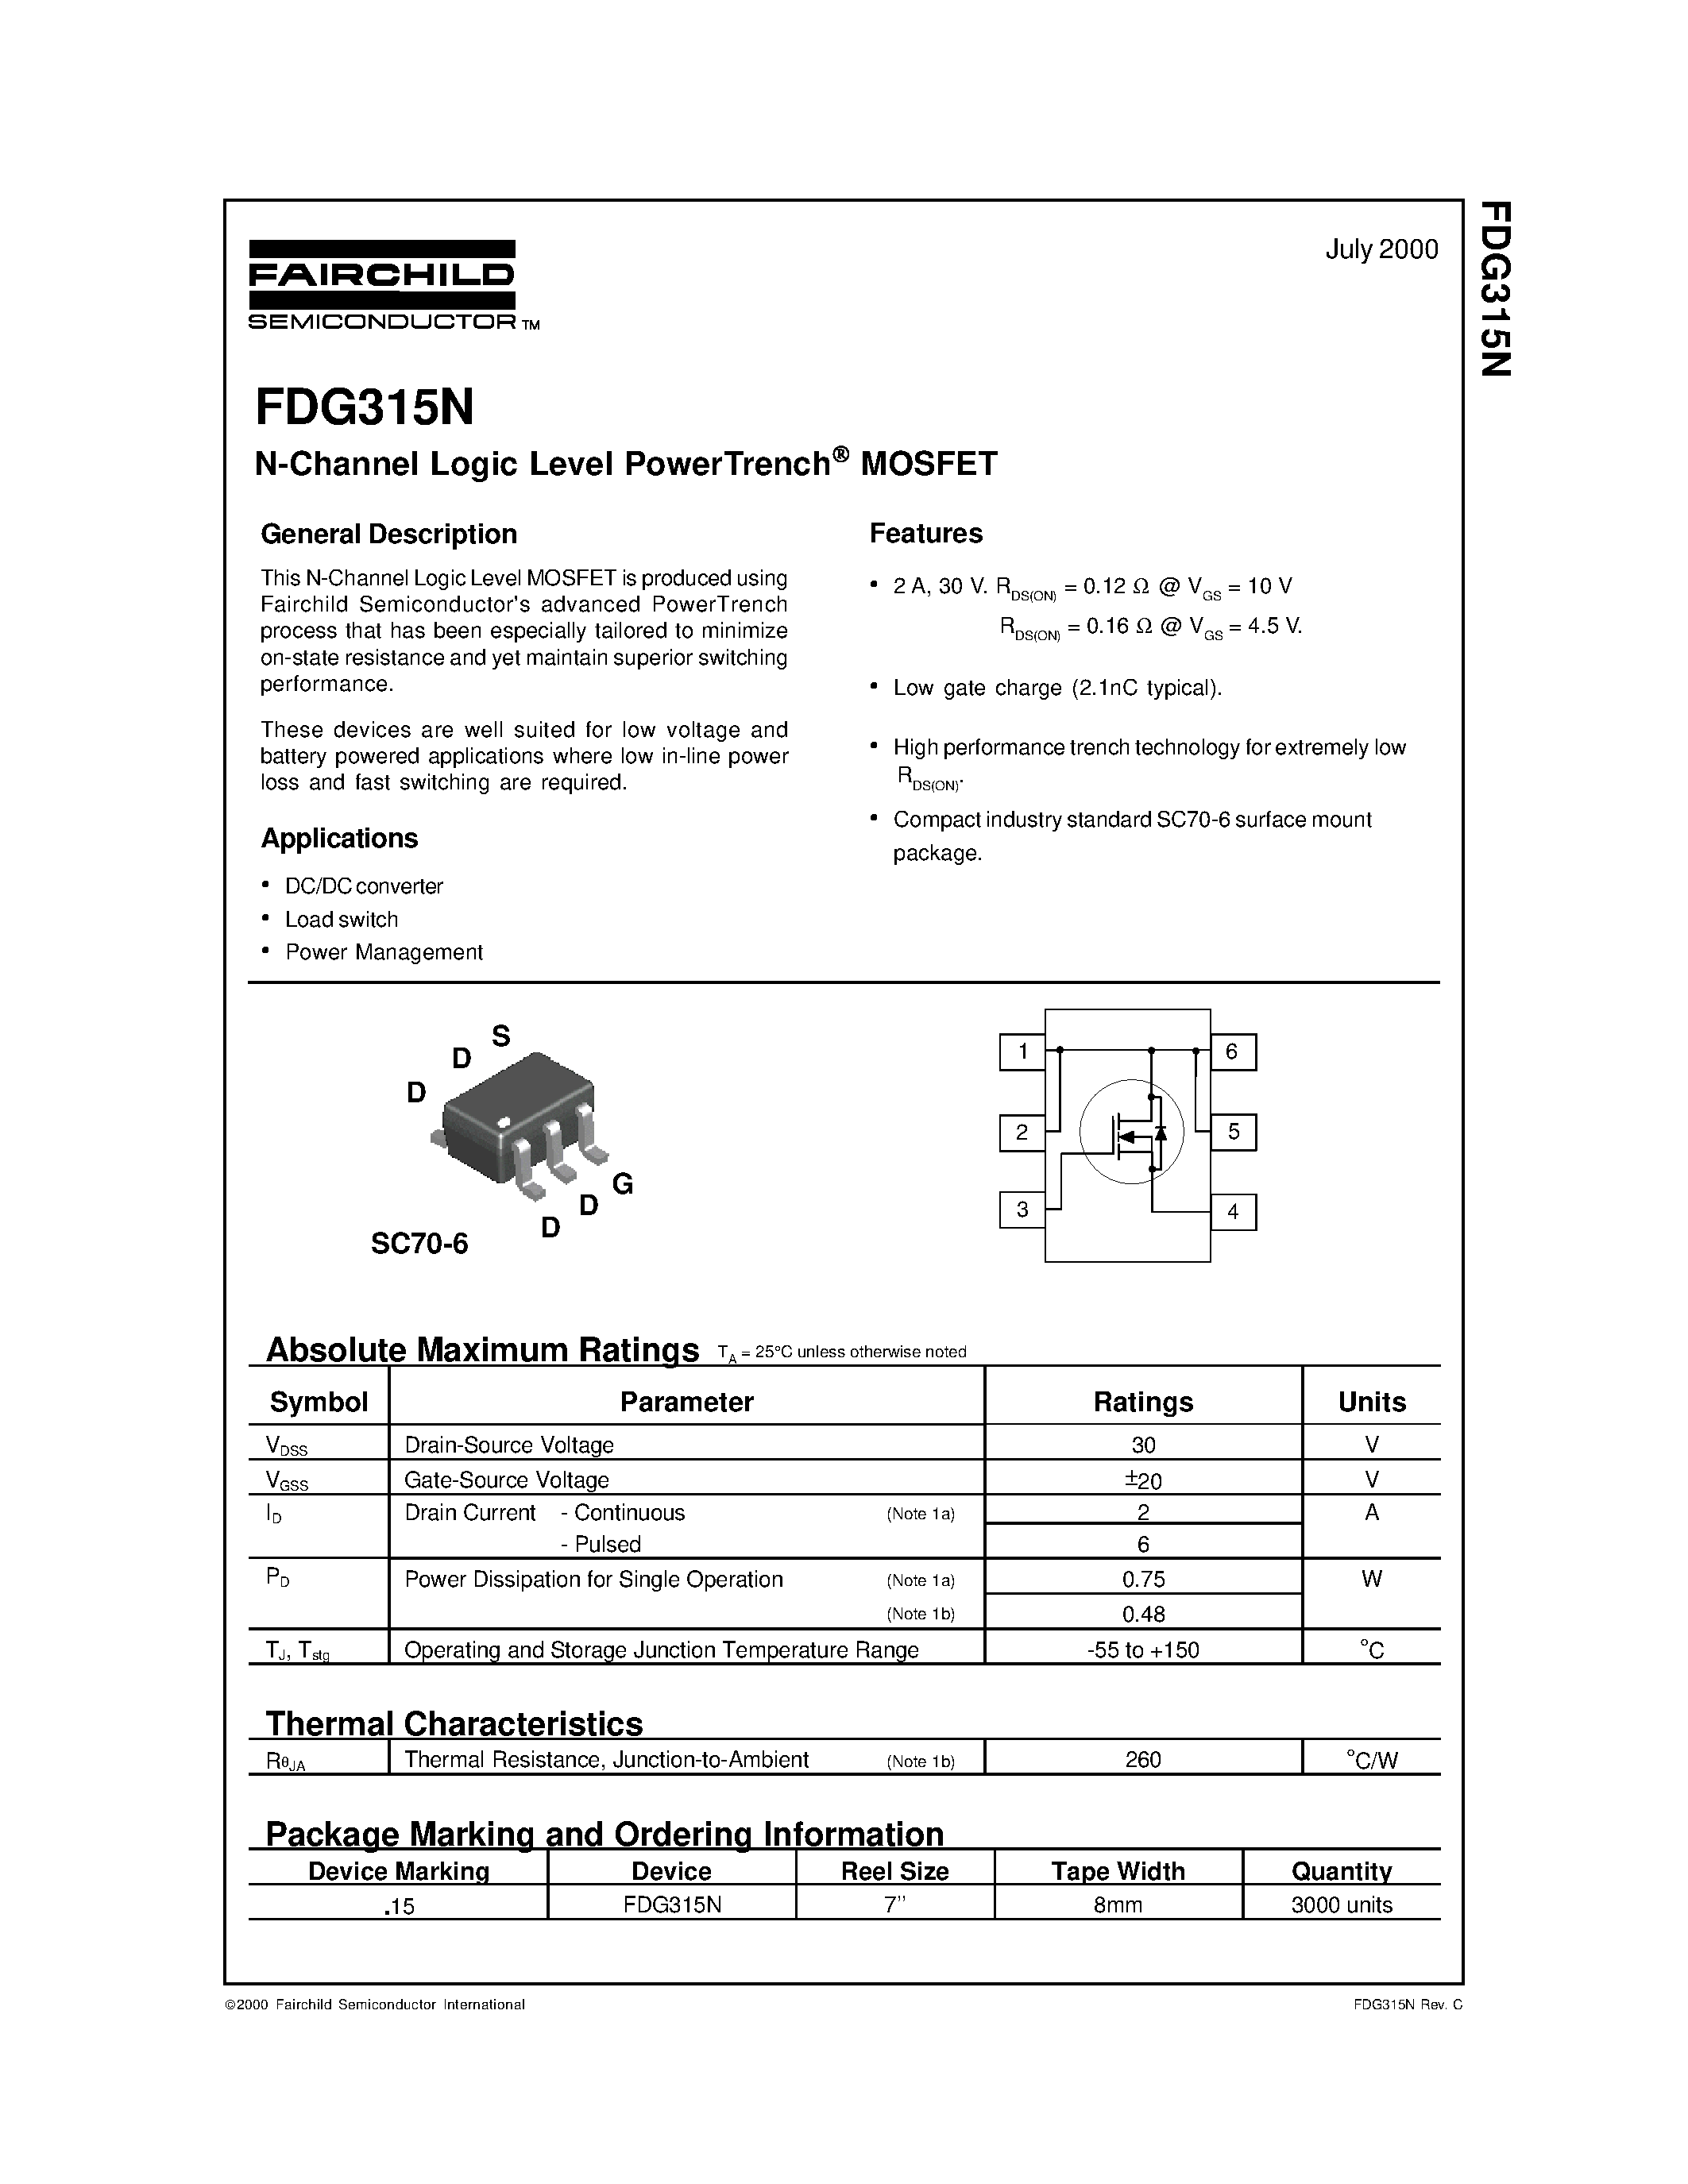 Datasheet FDG315N - N-Channel Logic Level PowerTrench MOSFET page 1